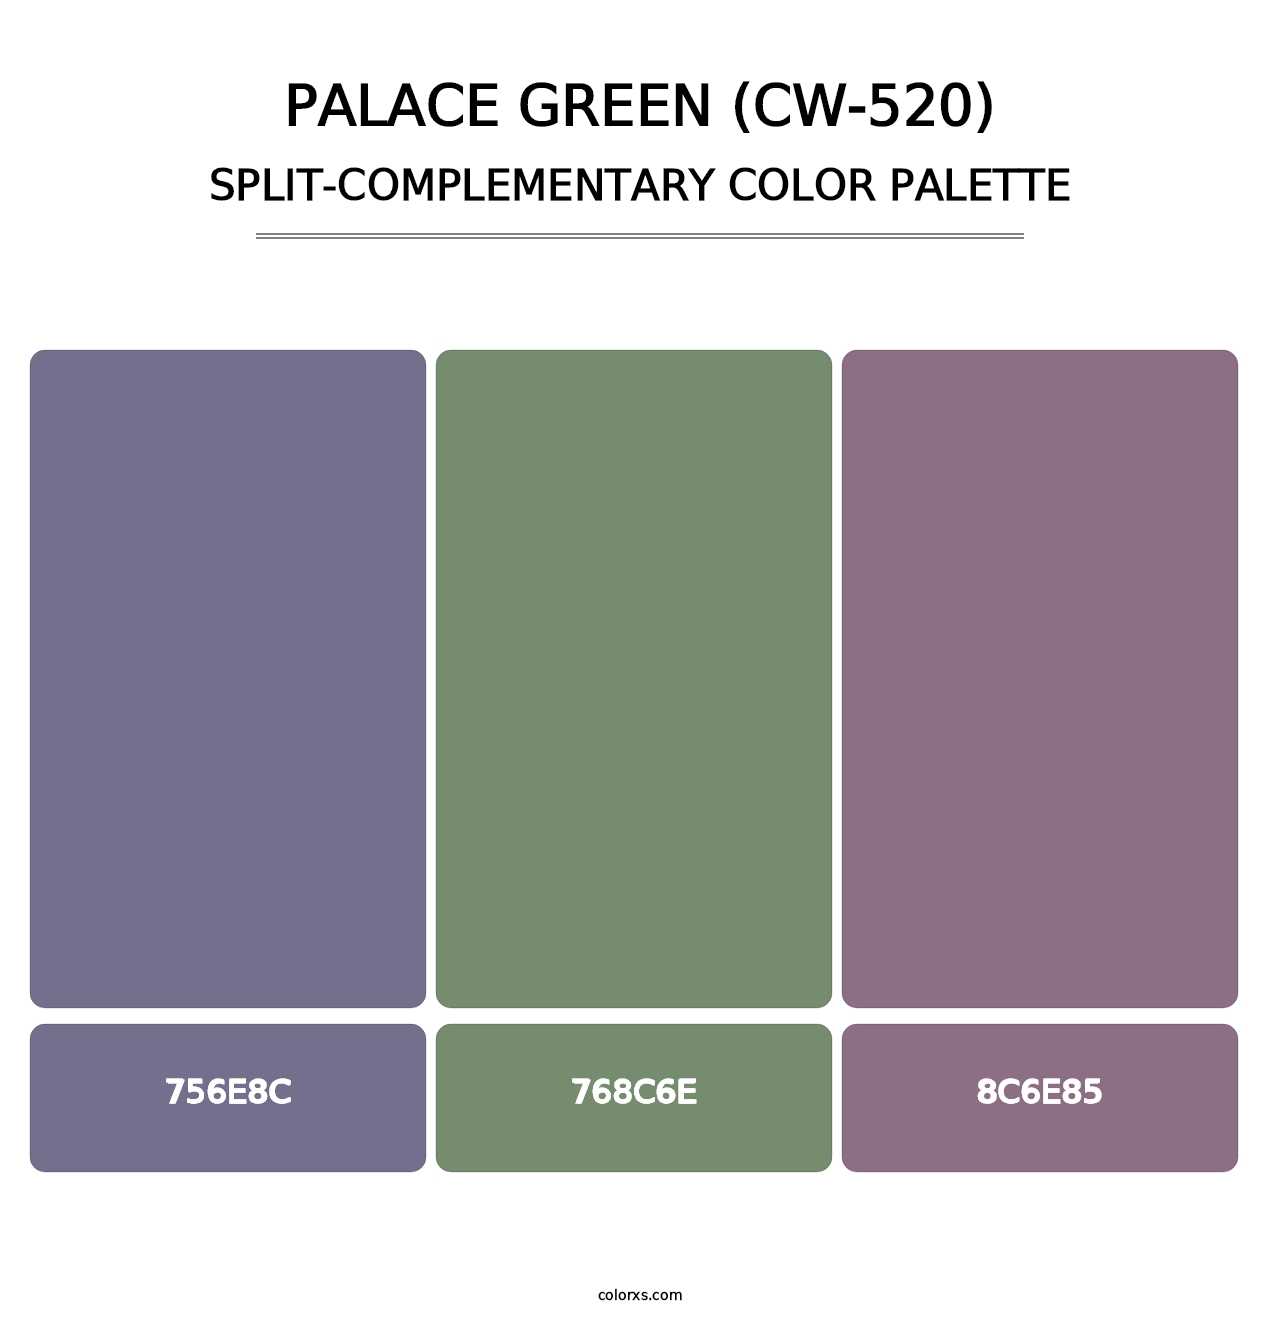 Palace Green (CW-520) - Split-Complementary Color Palette